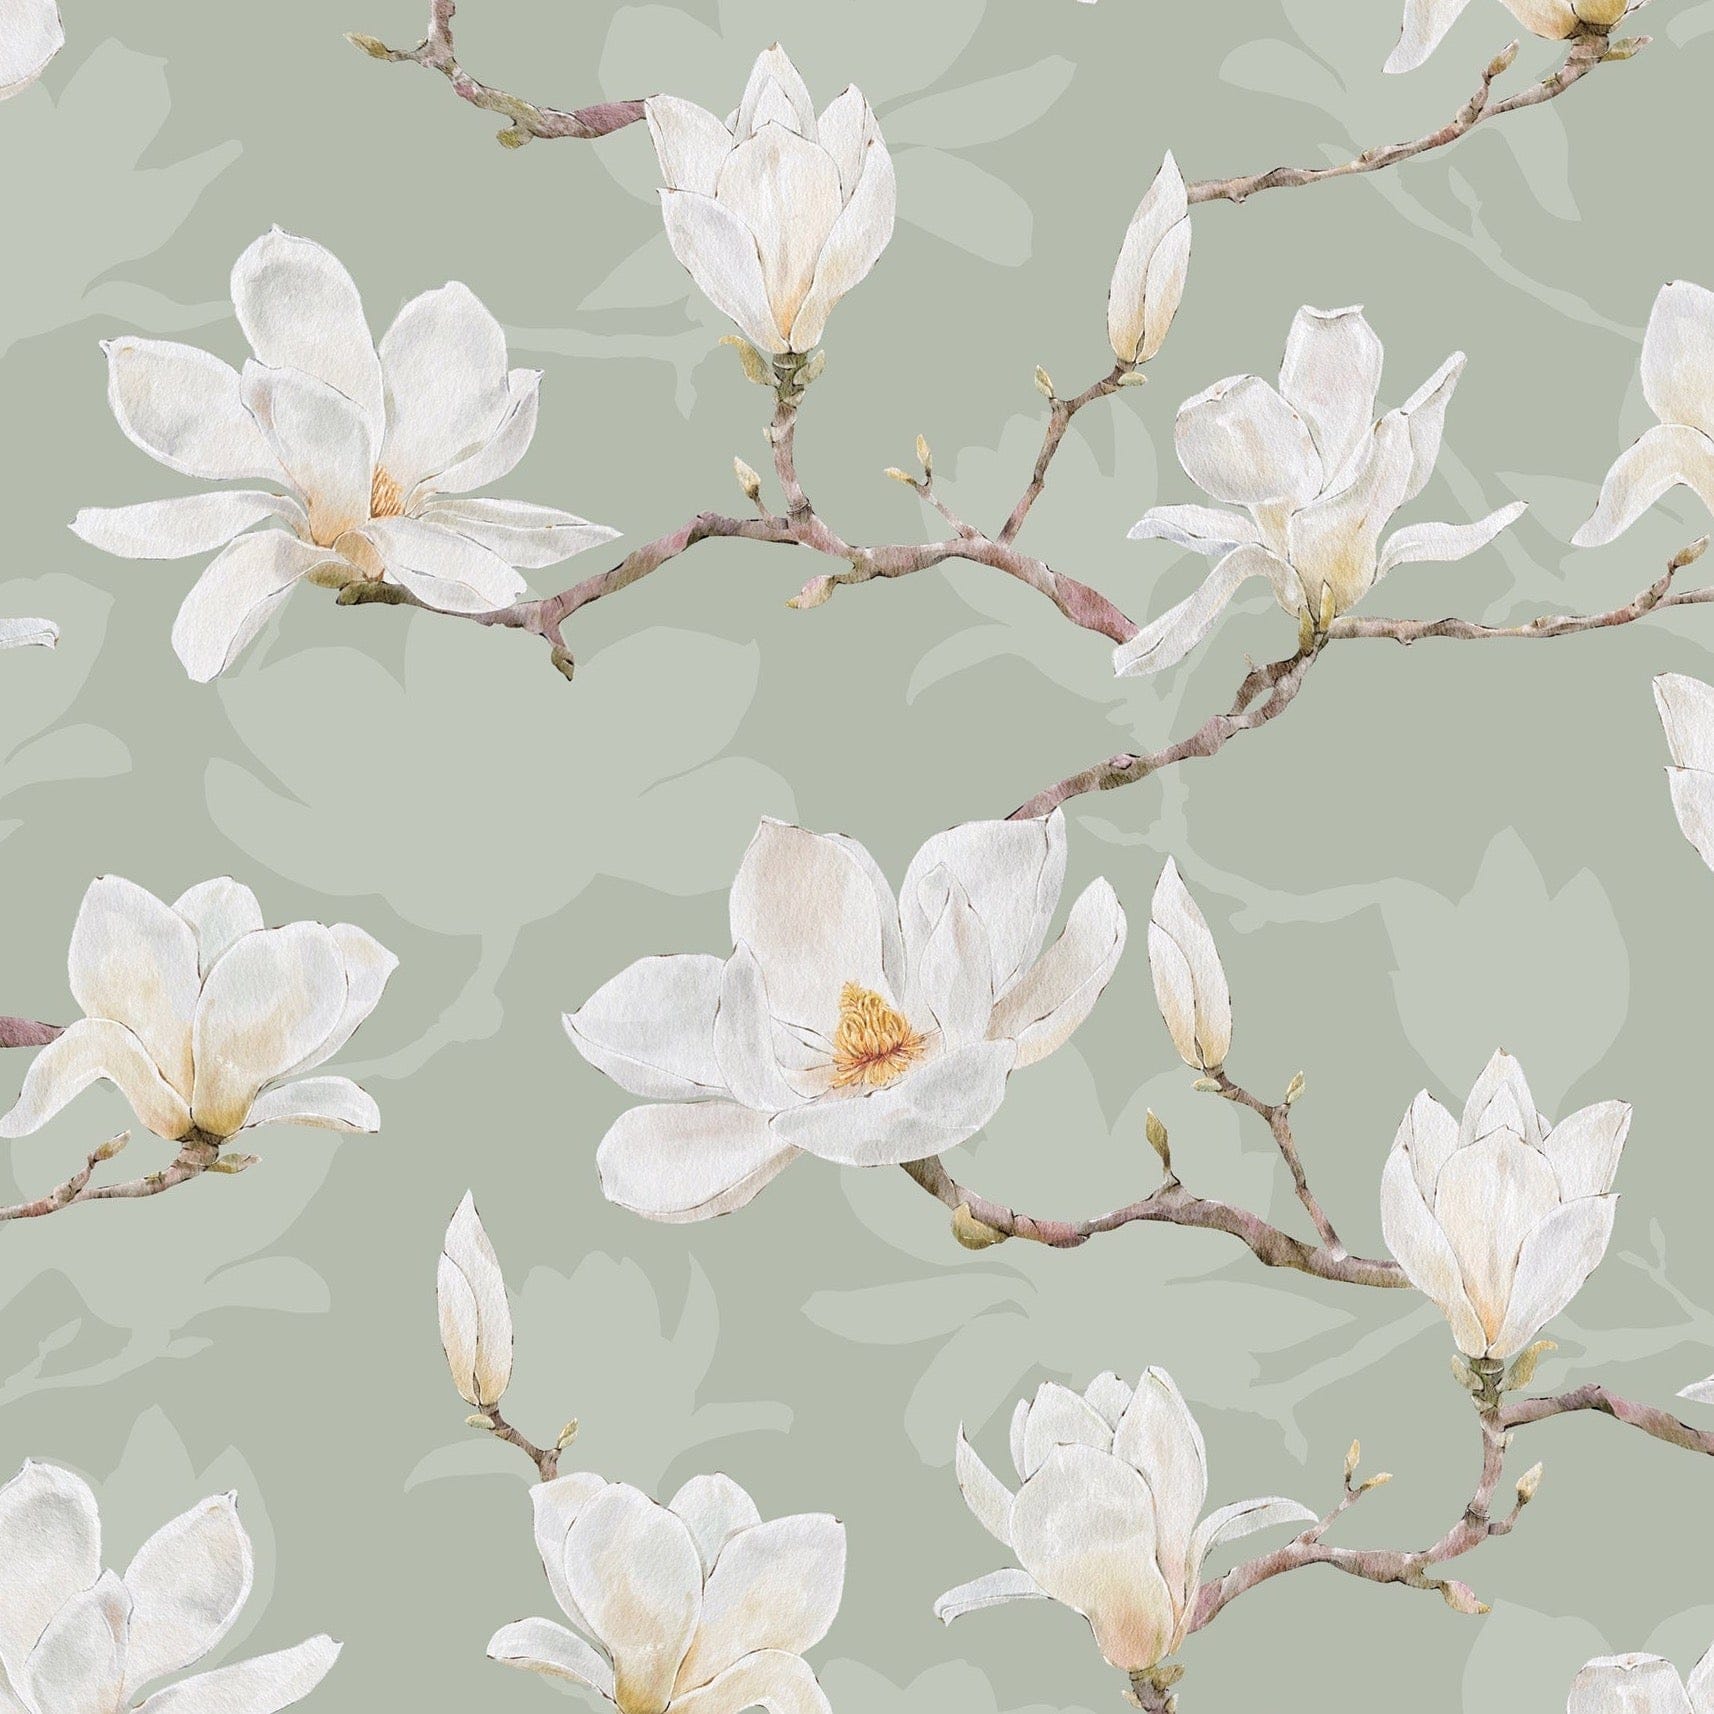 A close-up of the Watercolour Magnolia Wallpaper, highlighting the detailed brush strokes and soft color palette of the white magnolias set against a muted green backdrop, perfect for adding a touch of botanical beauty and tranquility to any room.